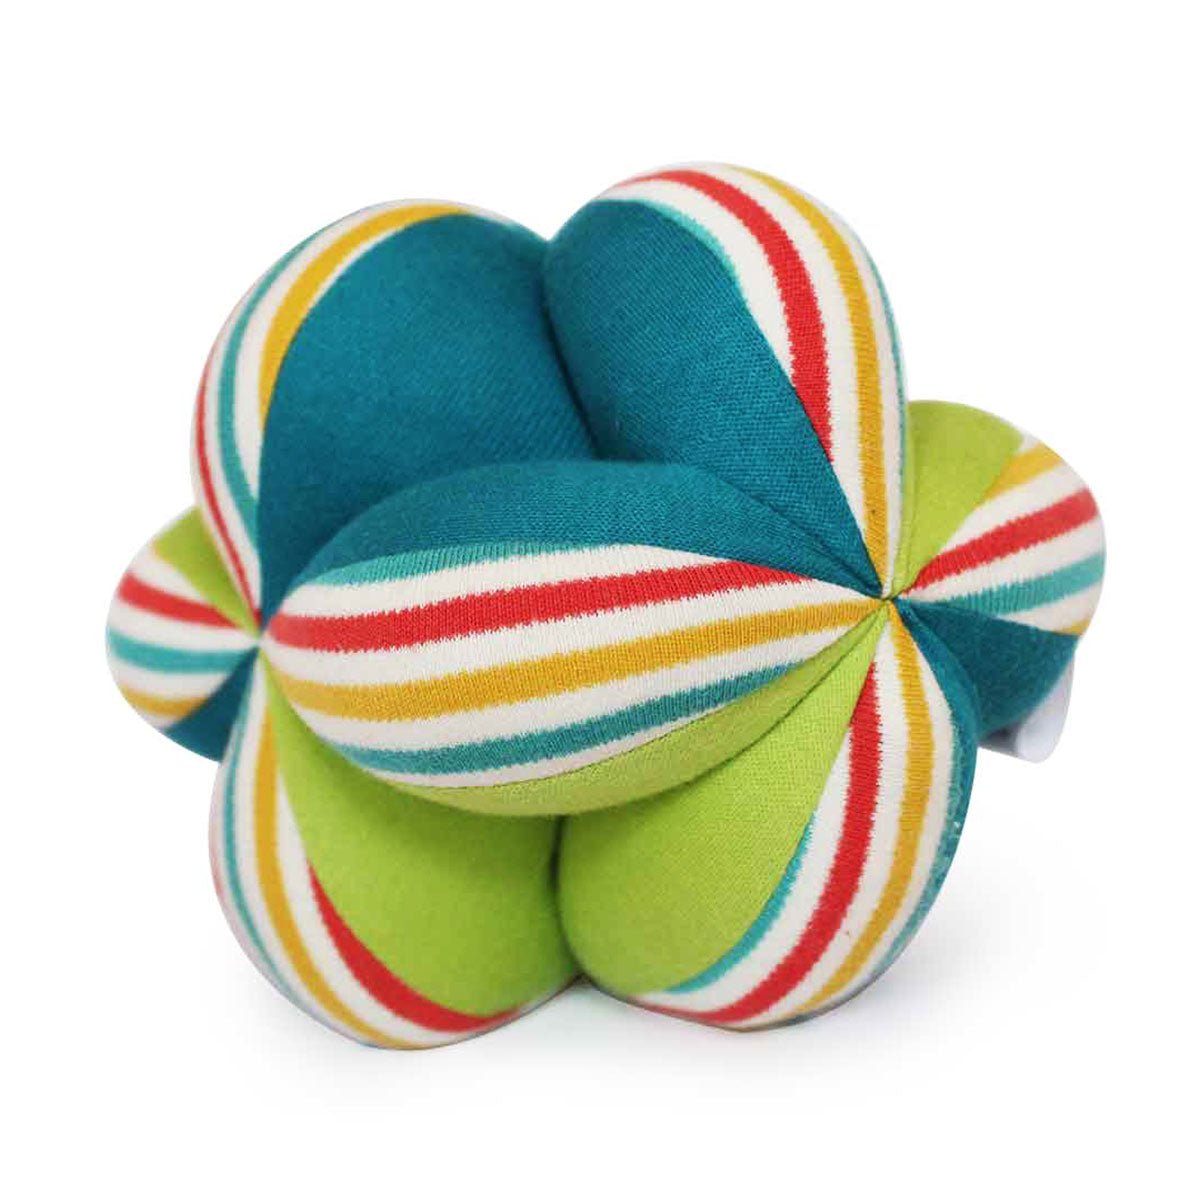 Shumee Colorful Clutch Ball For Babies - EXP-IN-IHD-CCB-C-6mo-0081